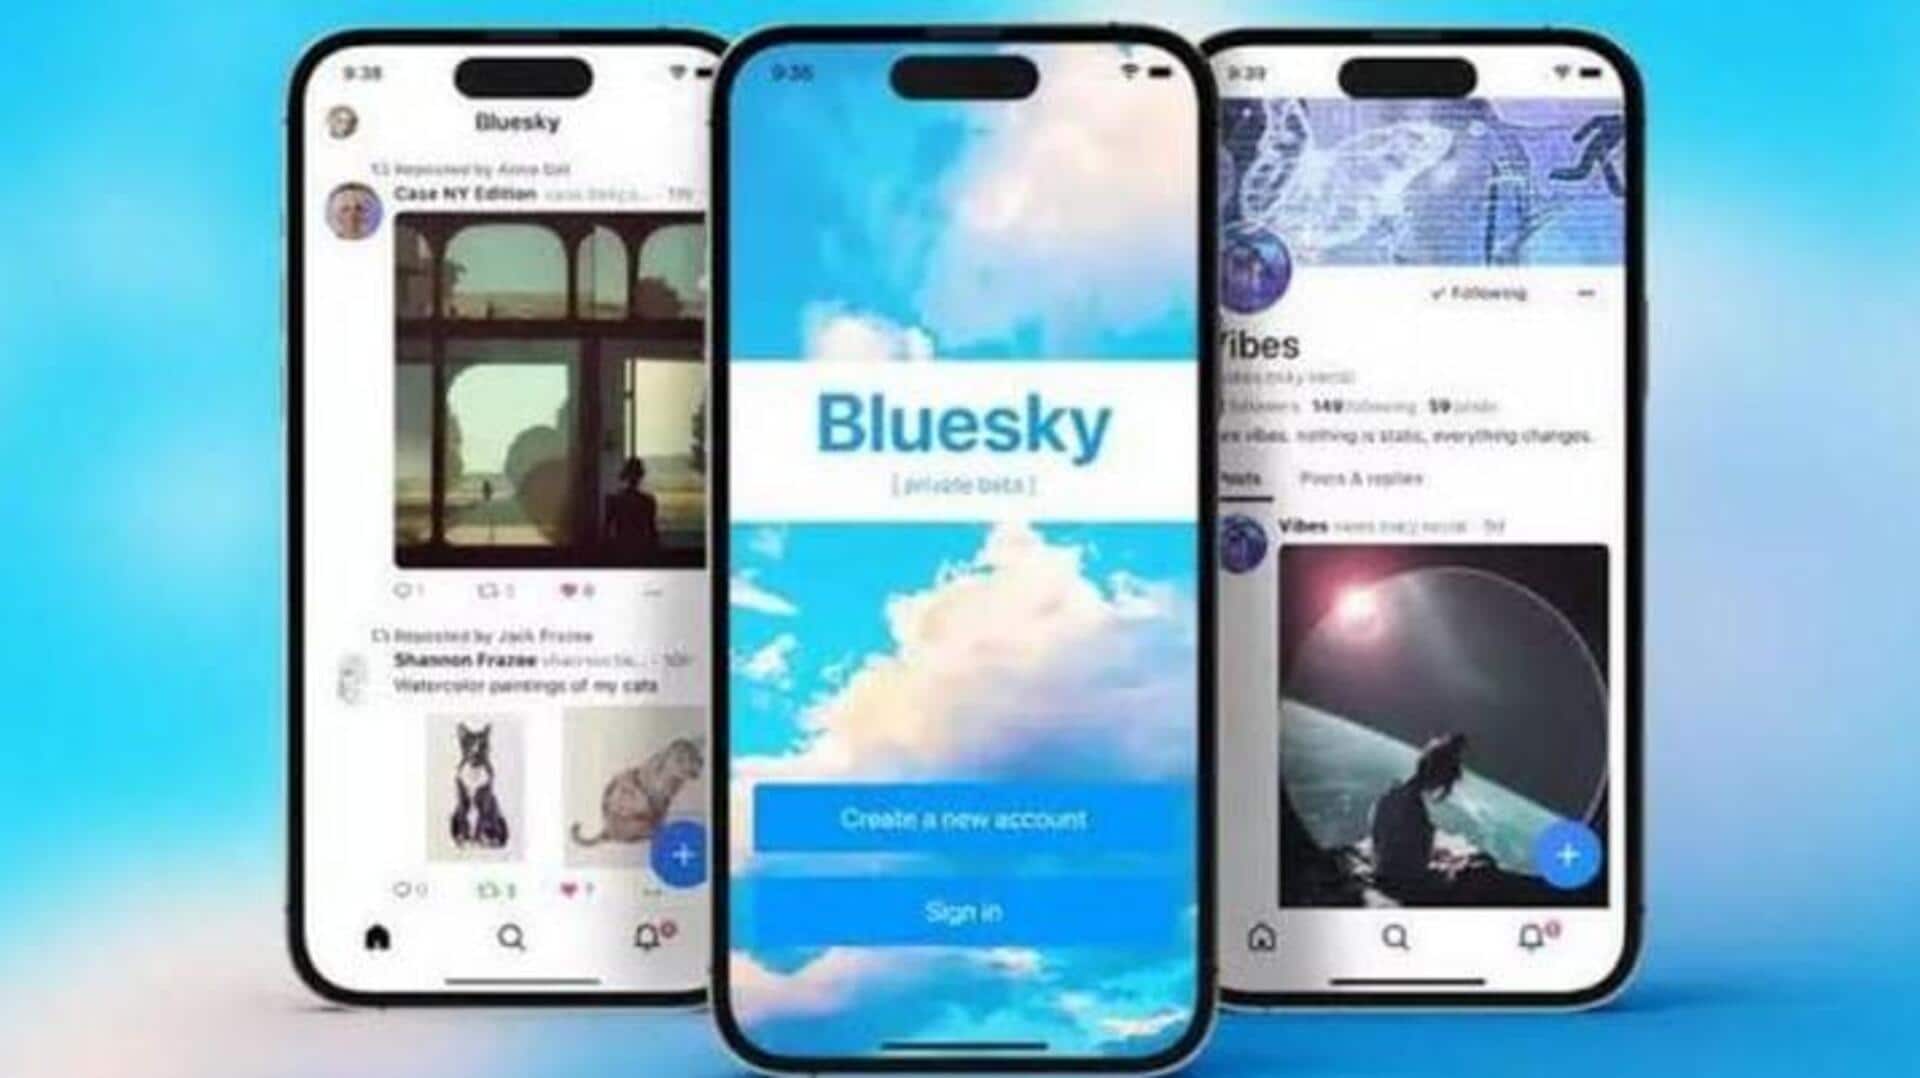 Bluesky improves content moderation with self-labeled posts